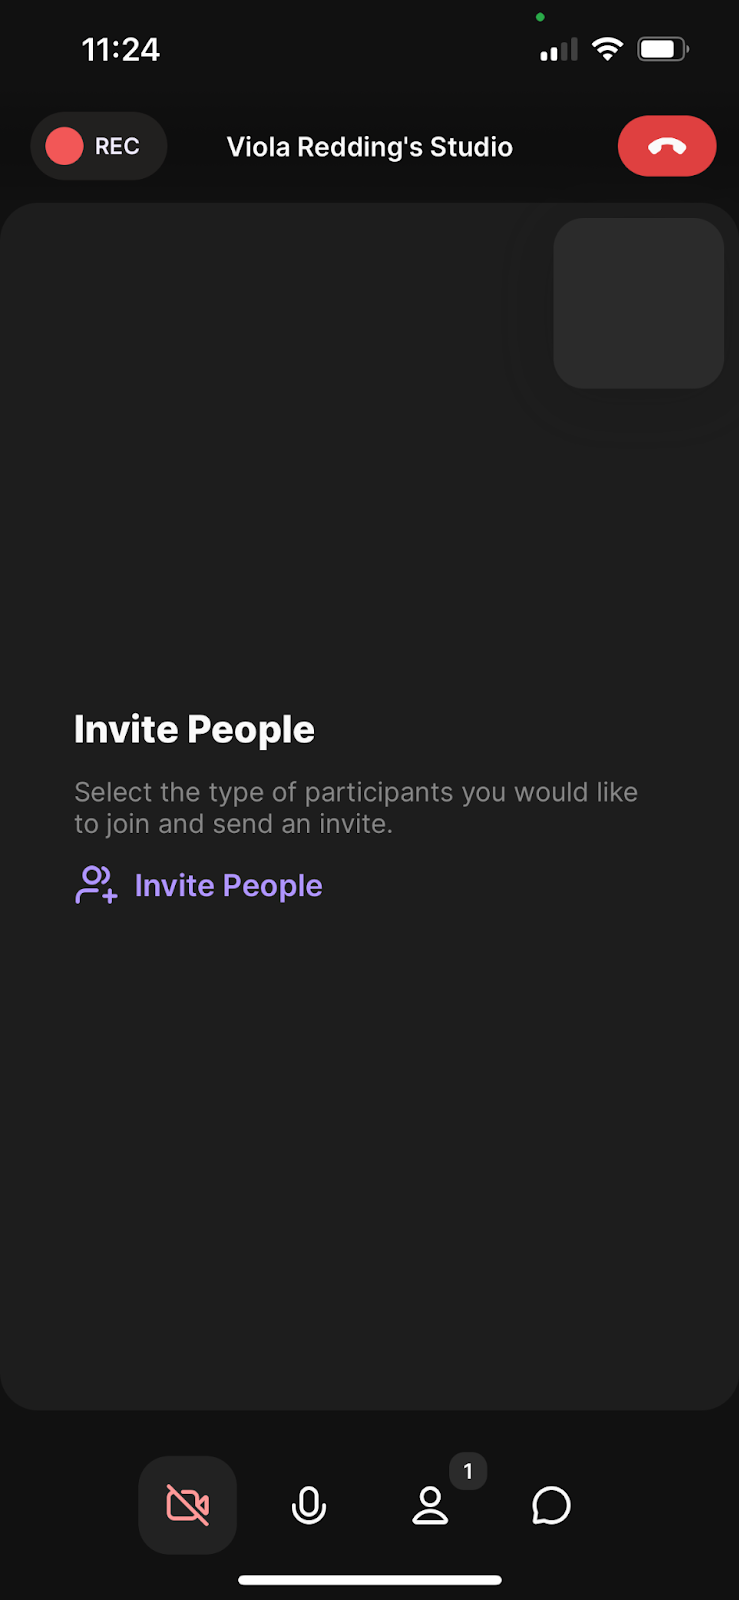 Inviting people to join a podcast recording from a phone